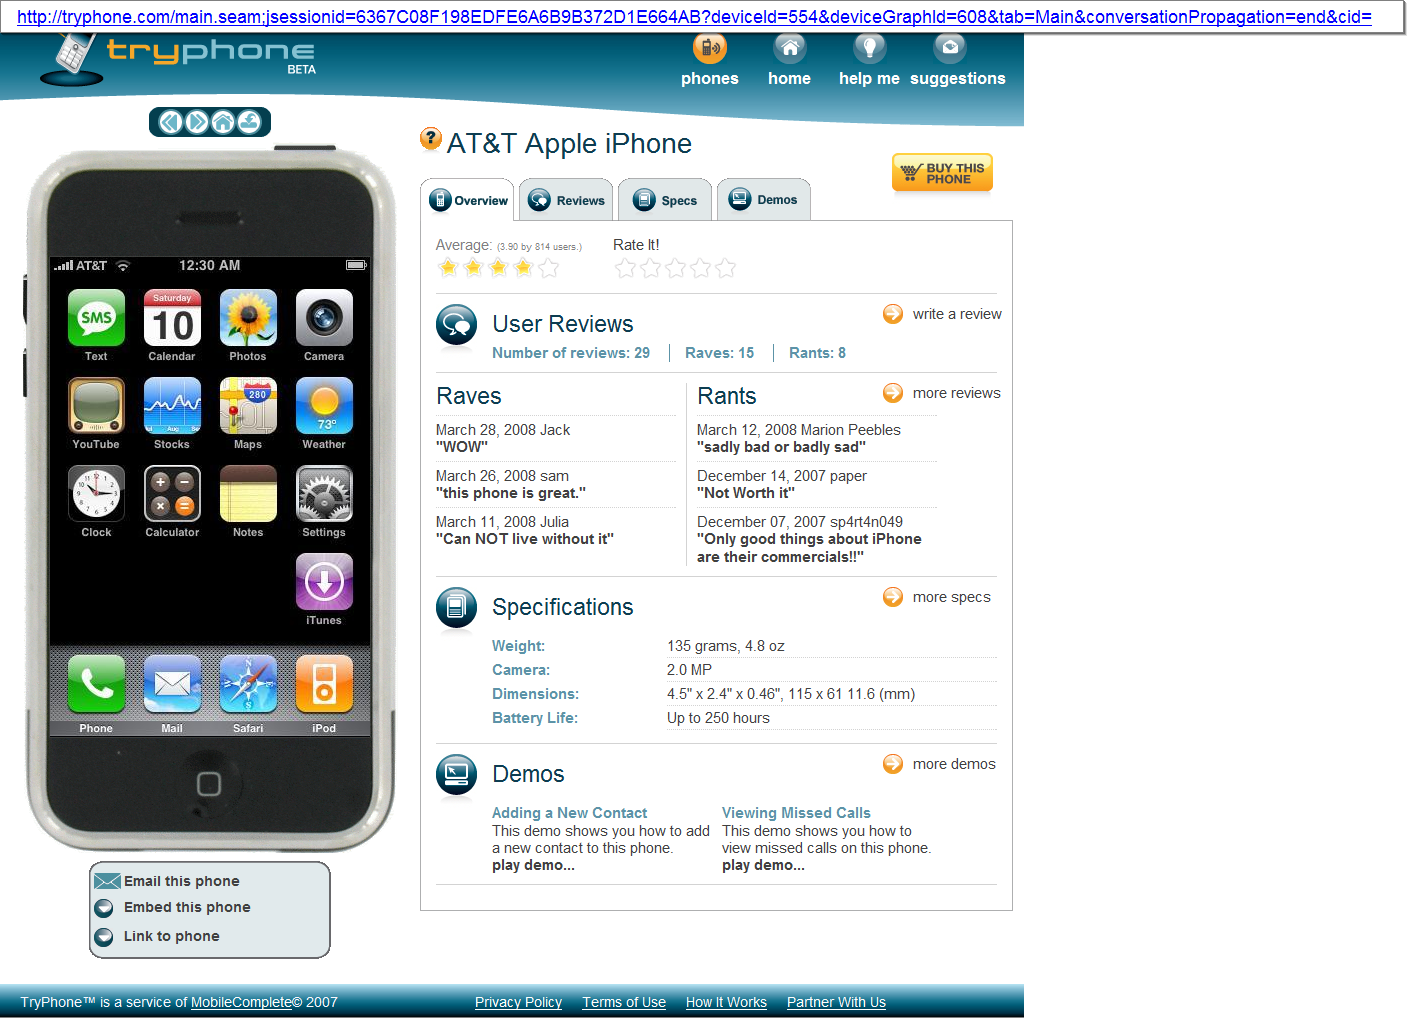 ['TryPhone+_+Phone+Details'+-+tryphone_com_main_seam;jsessionid=6367C08F198EDFE6A6B9B372D1E664AB_deviceId=554&deviceGraphId=608&tab=Main&conversationPropagation=end&cid=851263.png]